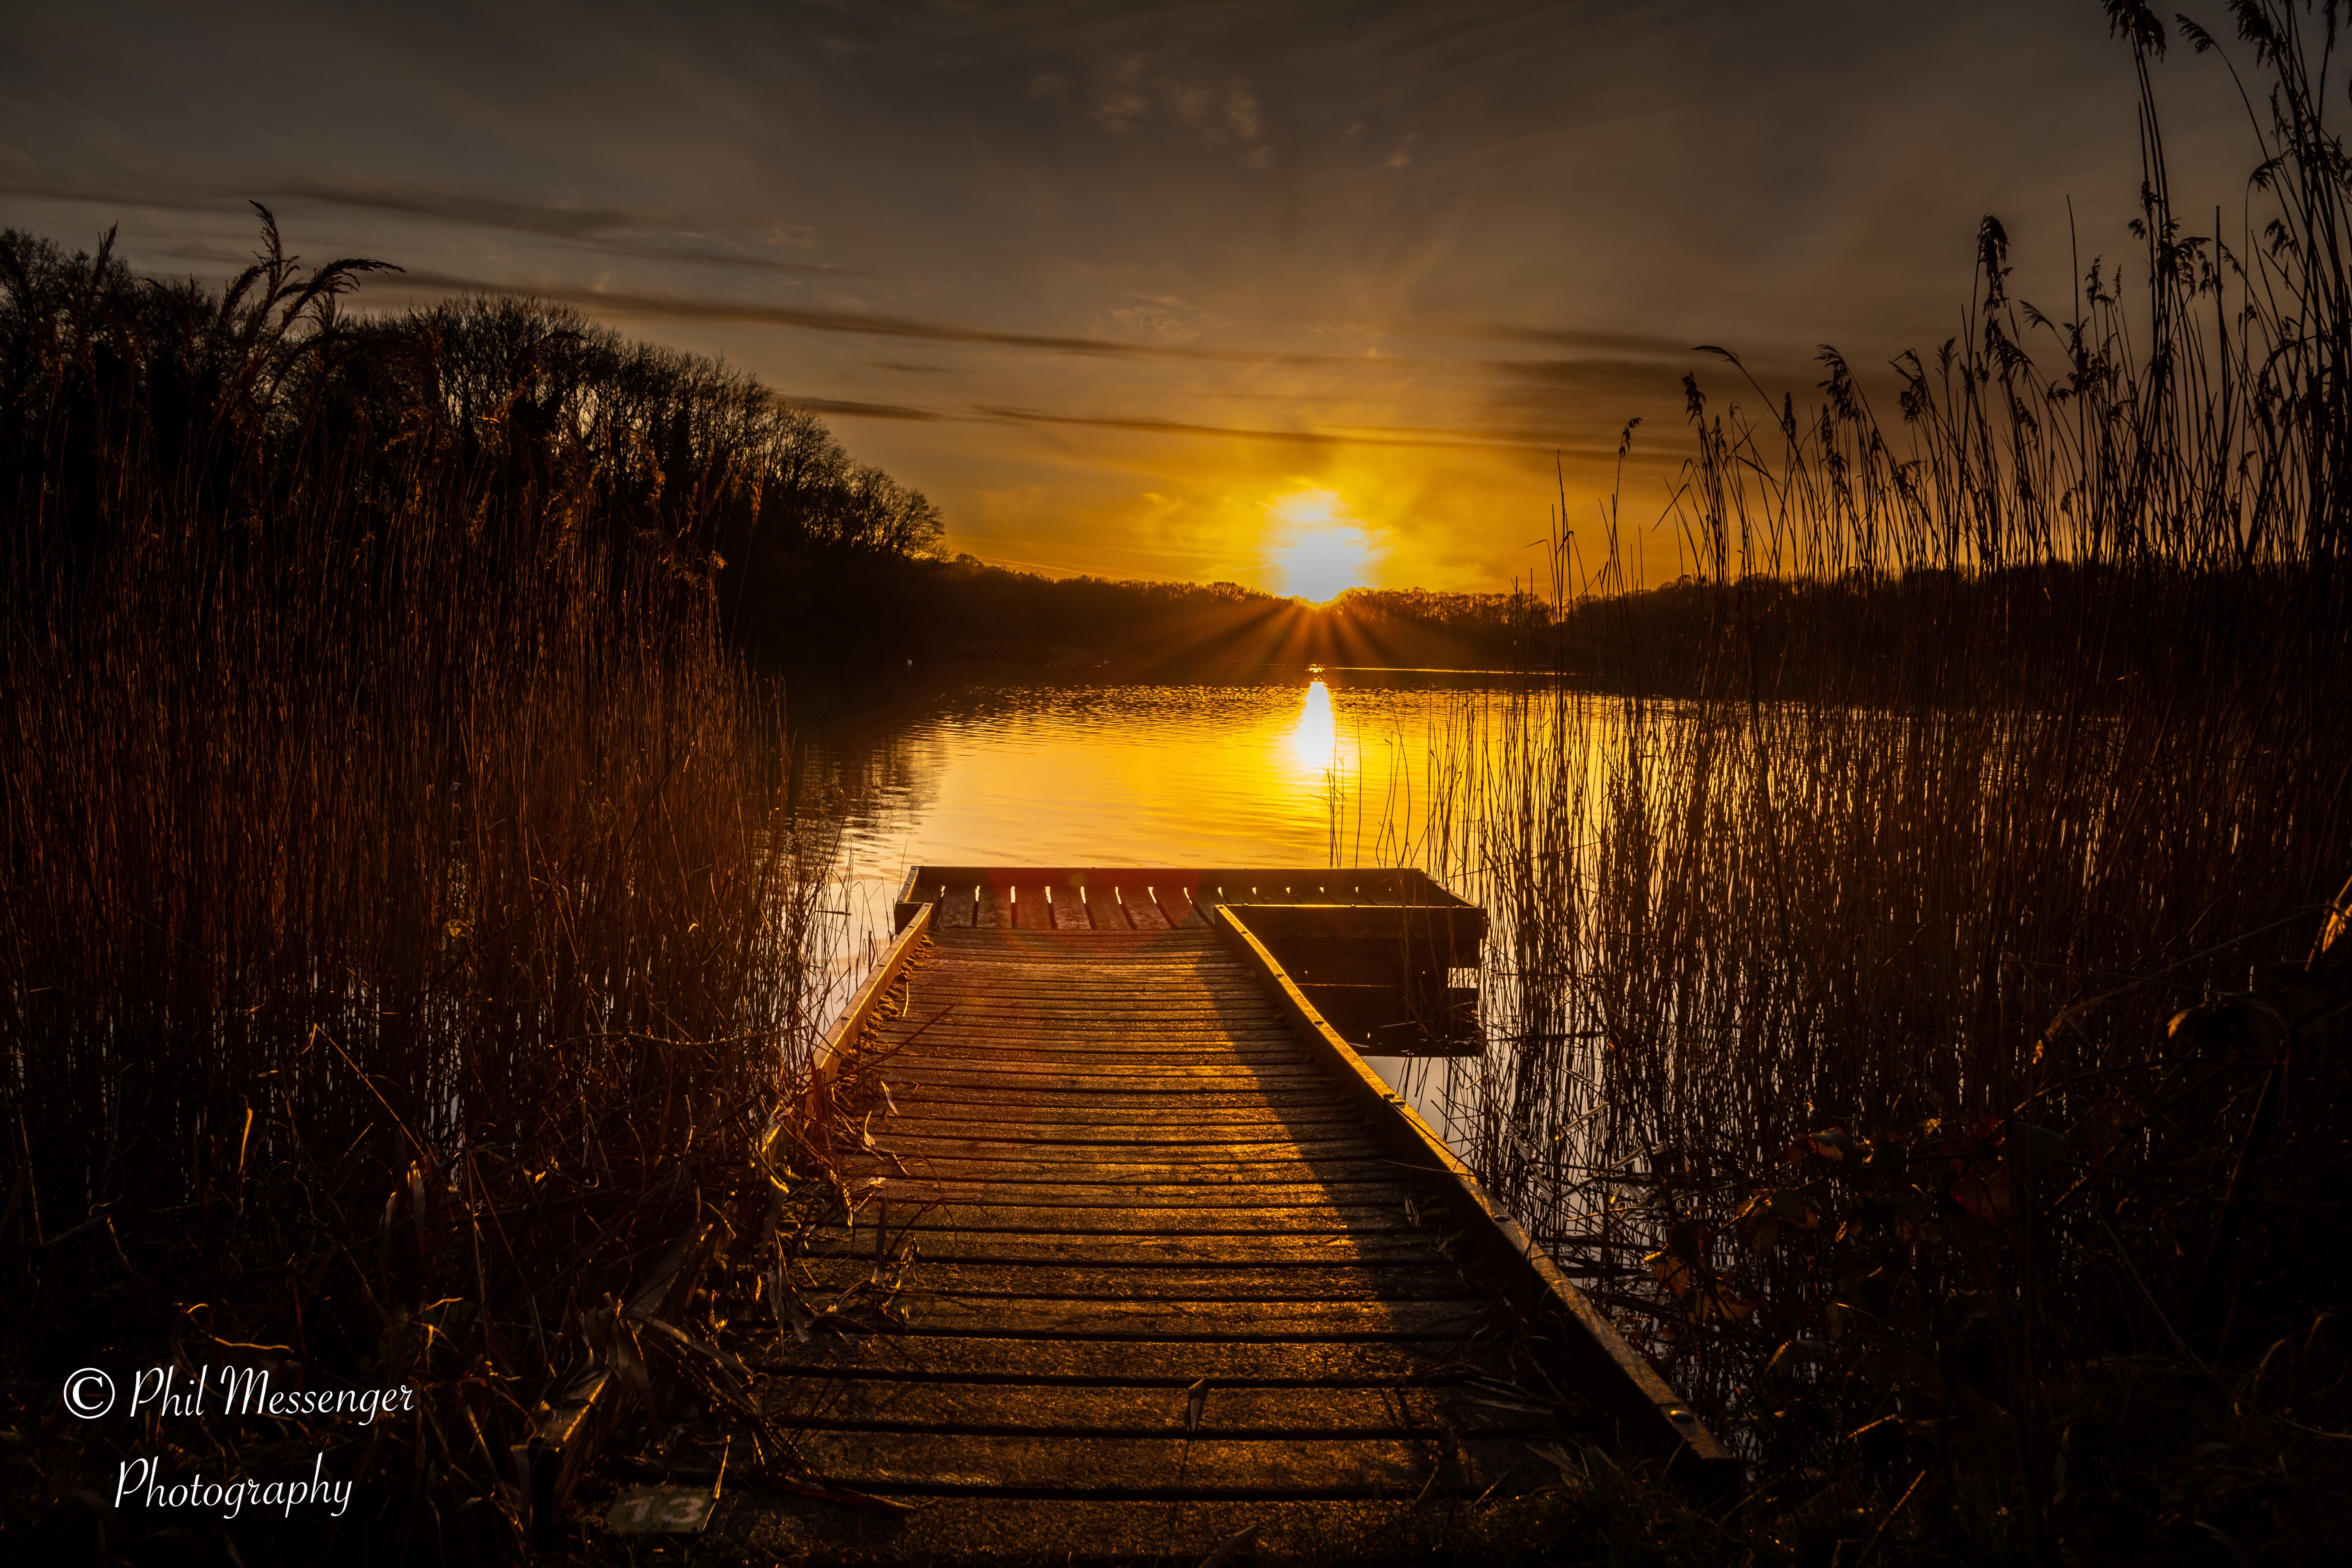 The jetty at Coate Water where I take many of my sunset images.